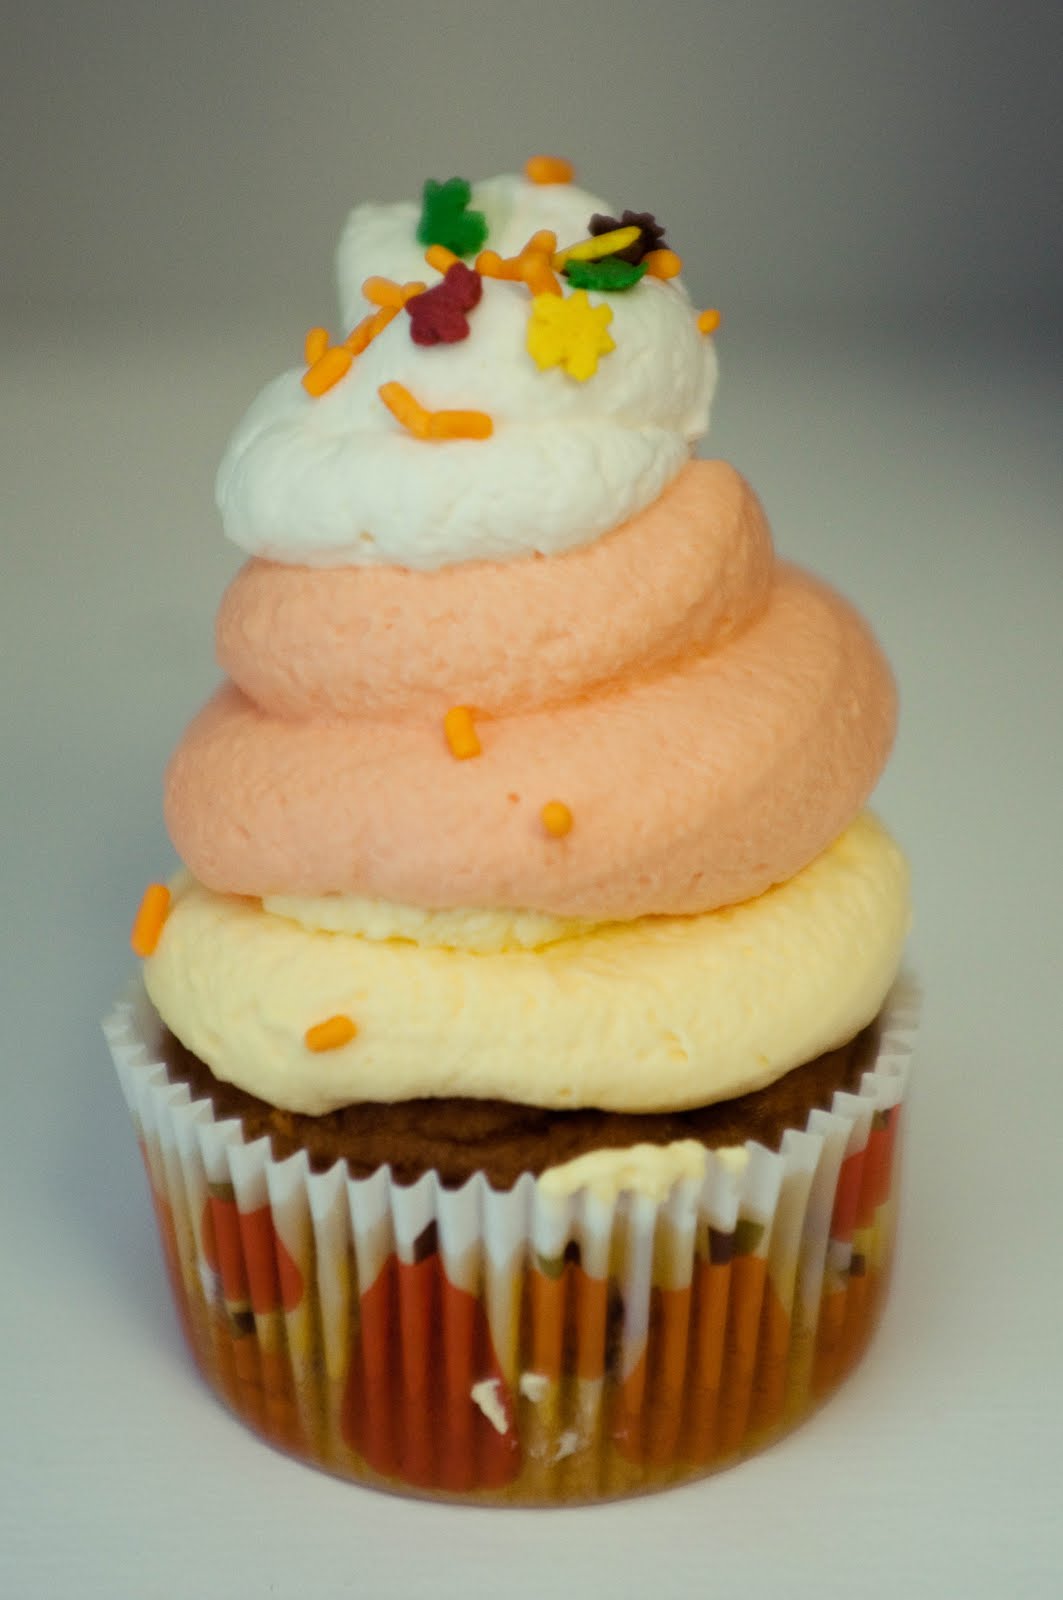 halloween cupcakes candy corn Posted byShaileenandKurt Cline at 3:32 PM